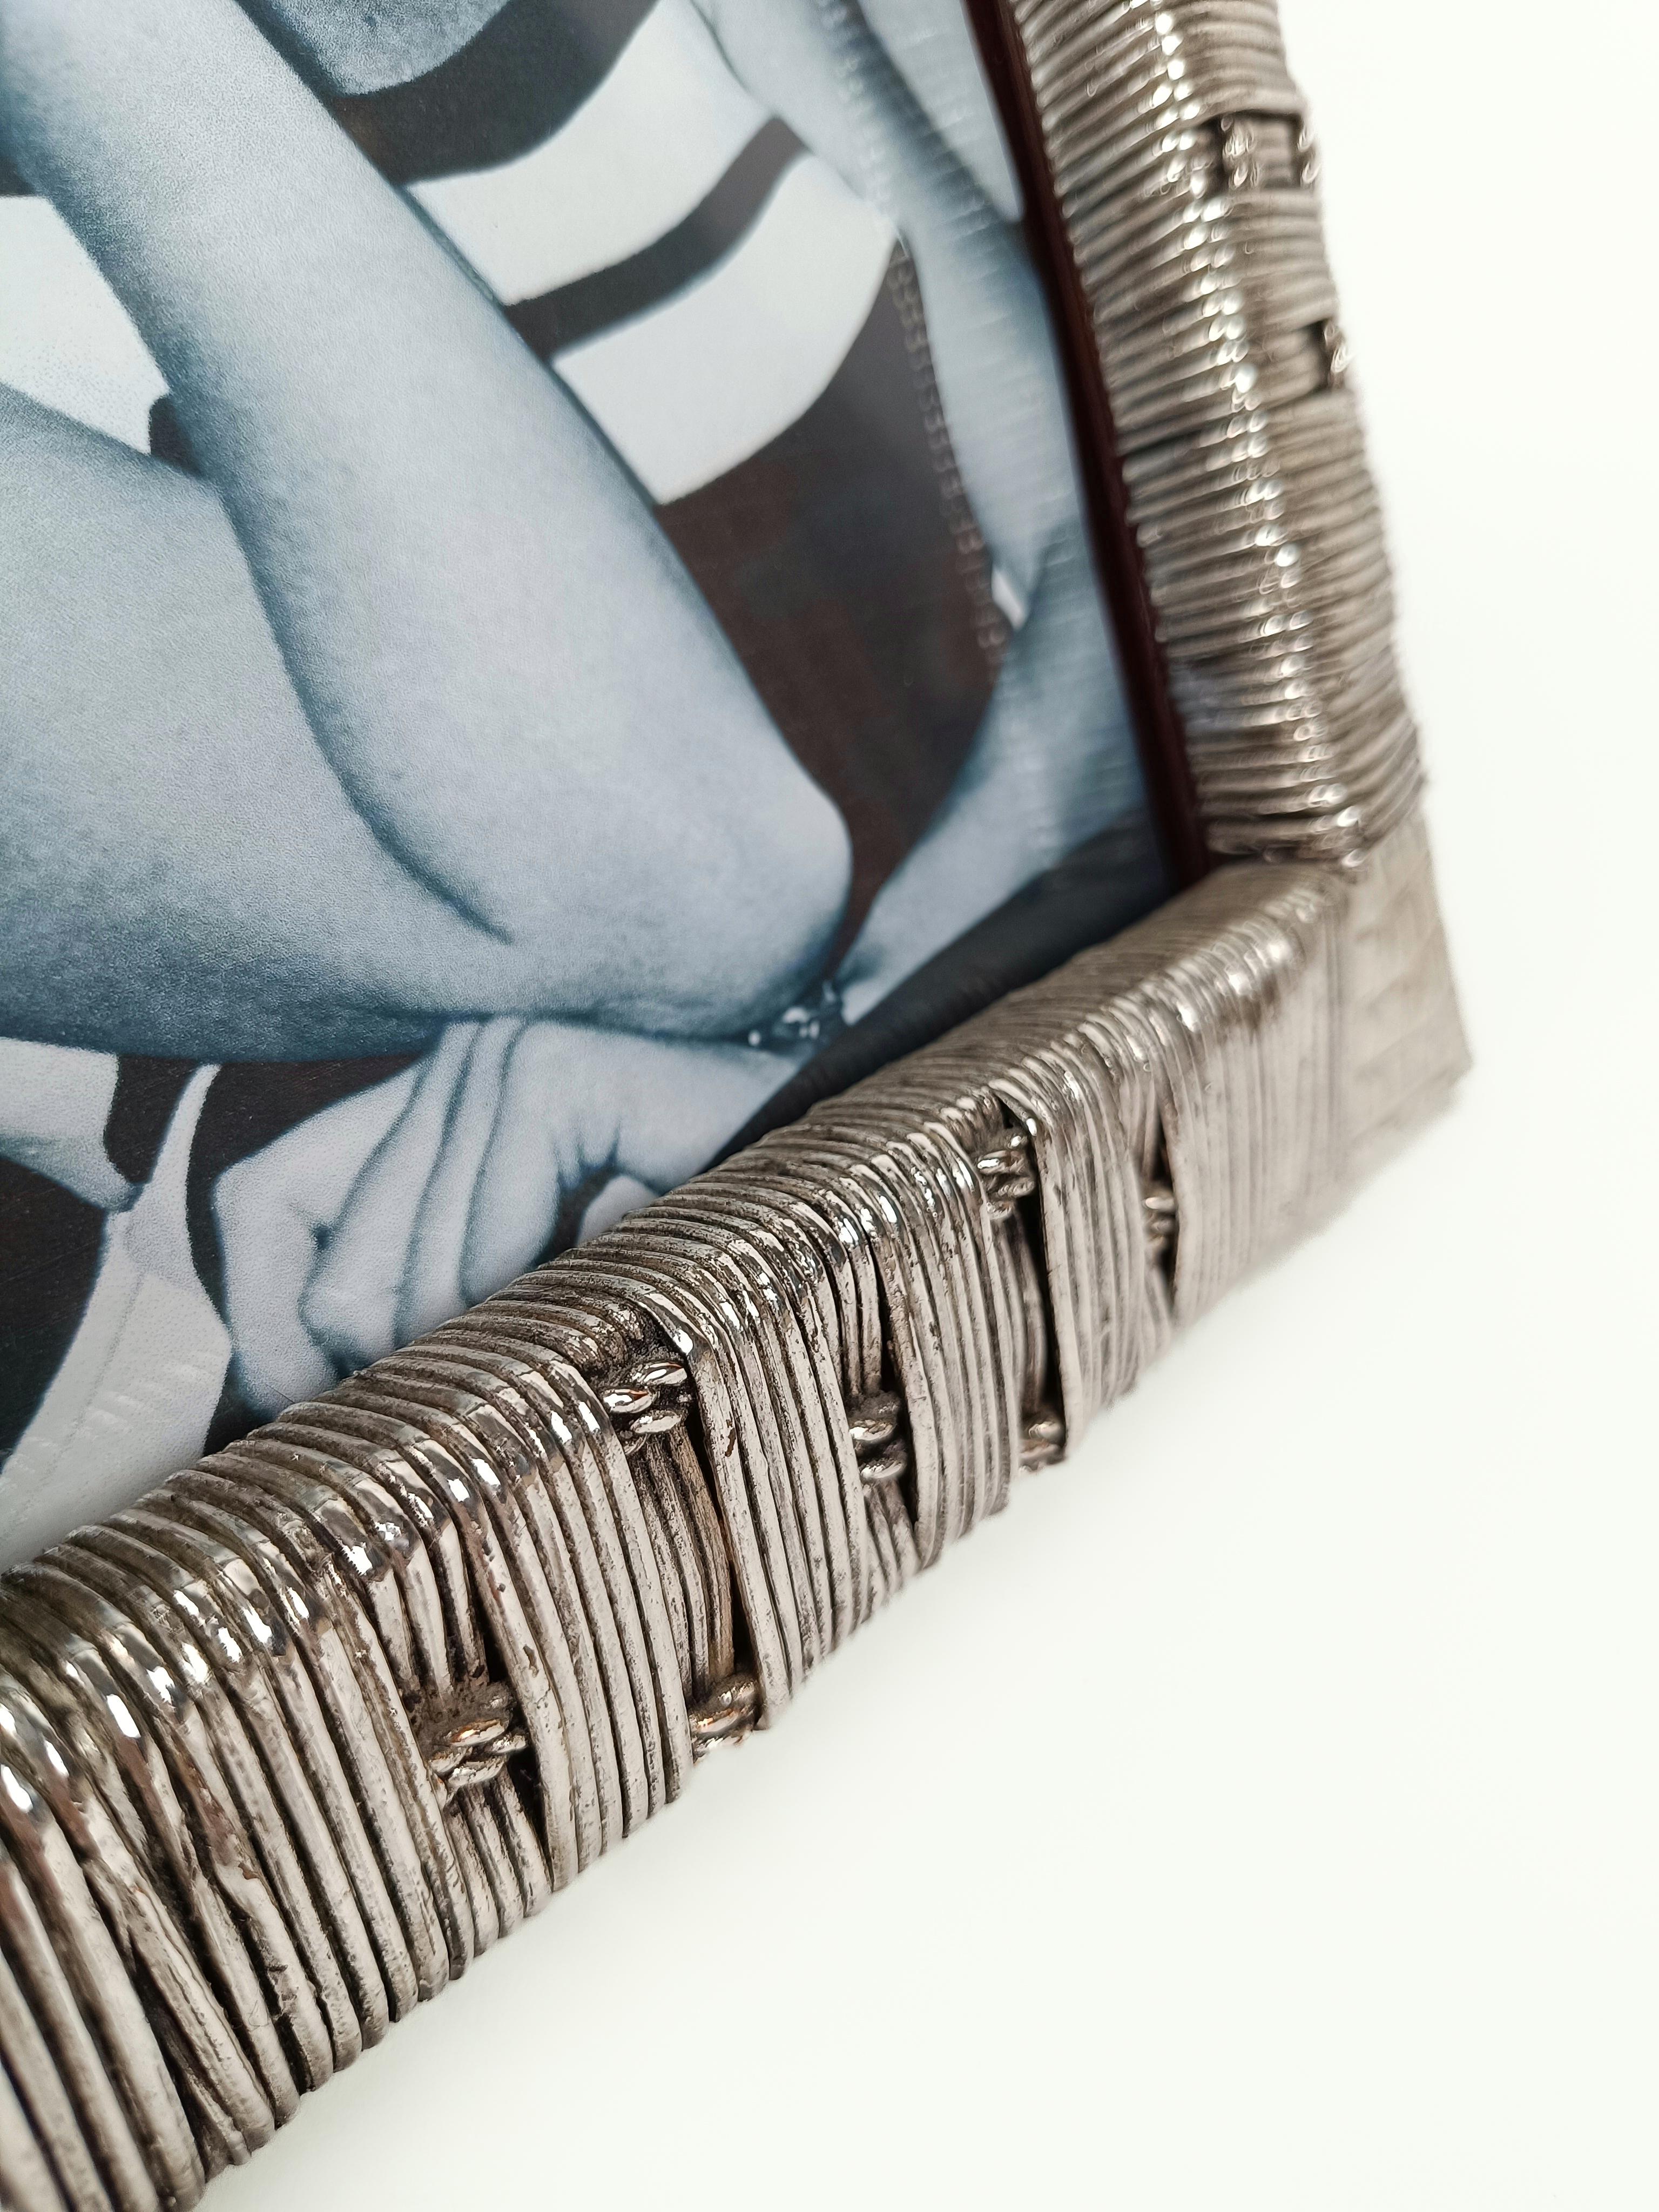 Midcentury Table Picture Frame Made in Silver Plated Woven Wicker, Italy 1970s For Sale 4